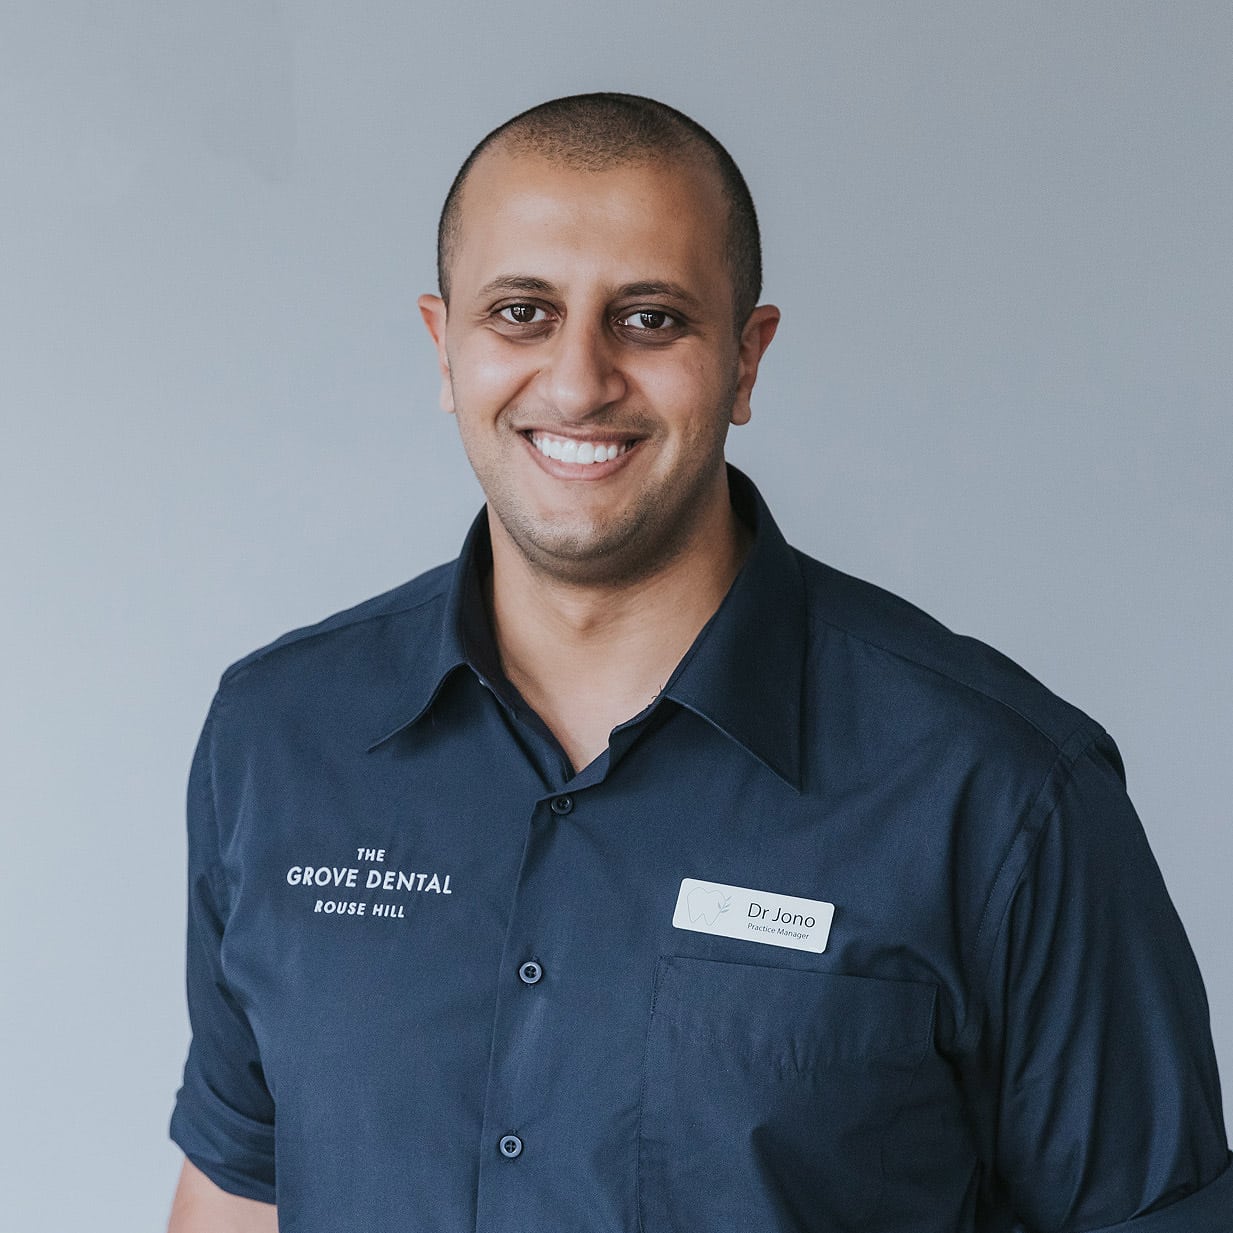 rouse hill dental practice manager jonathan hakim